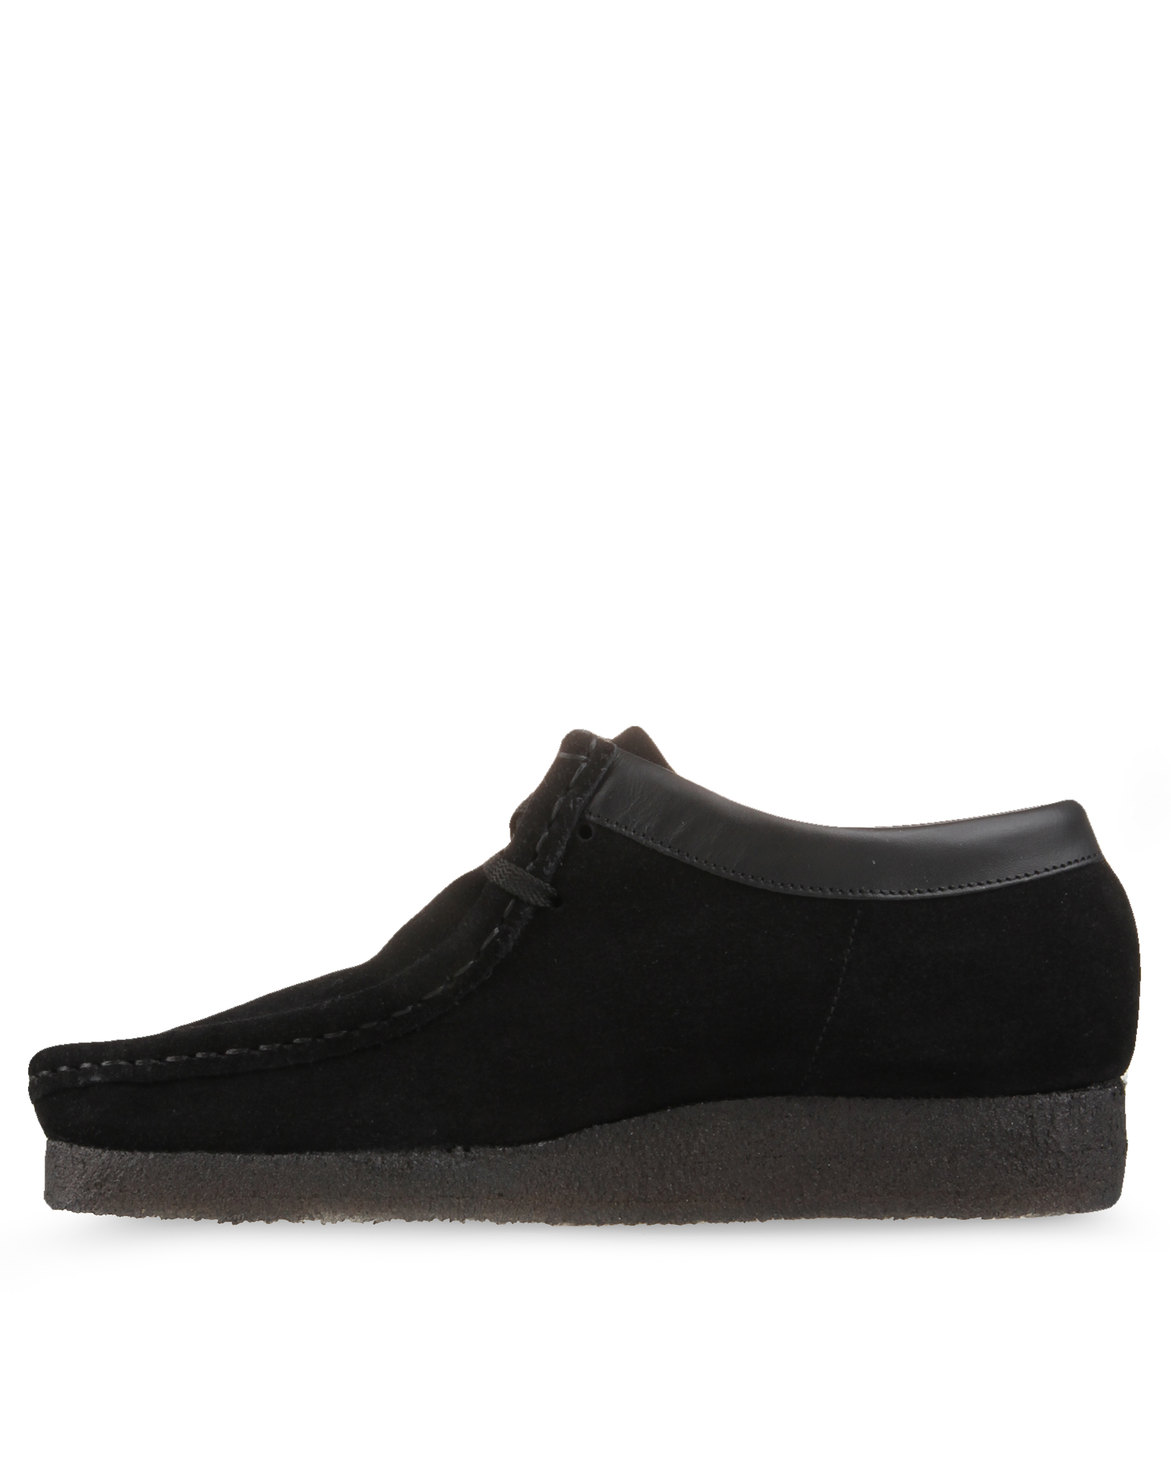 Grasshoppers Softee Suede and Leather Shoes Black | Zando